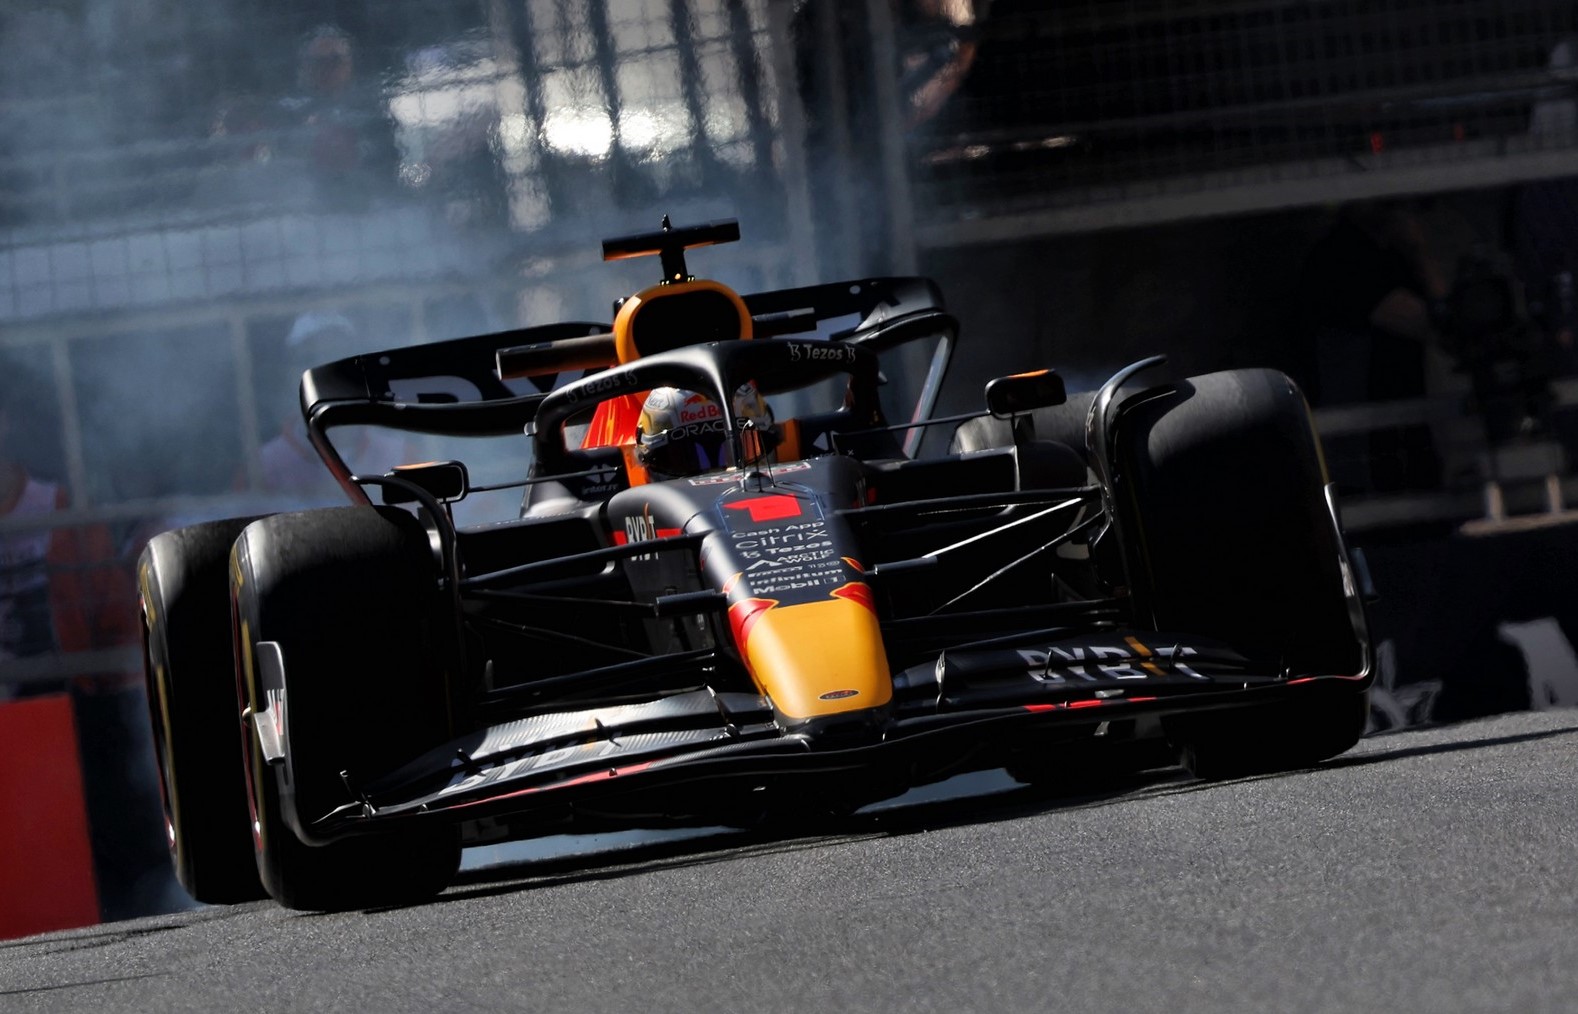 F1 teams protest against Verstappen's DRS flapping in Baku